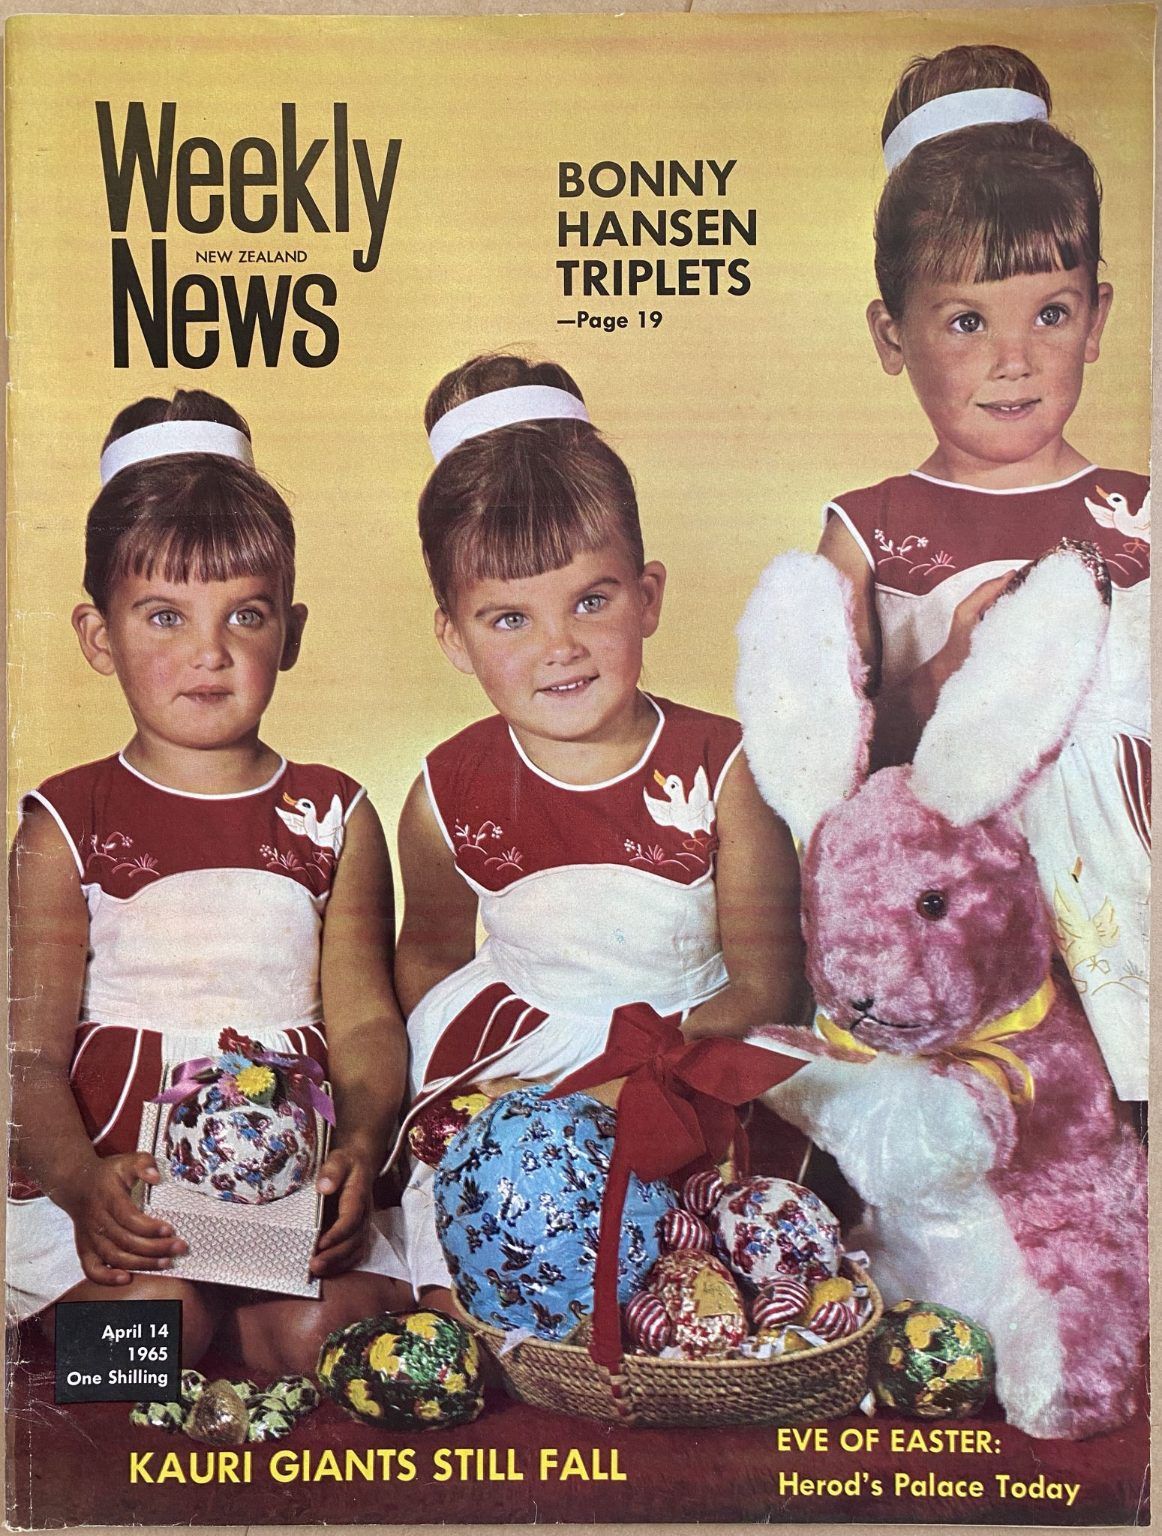 OLD NEWSPAPER: New Zealand Weekly News, No. 5290, 14 April 1965